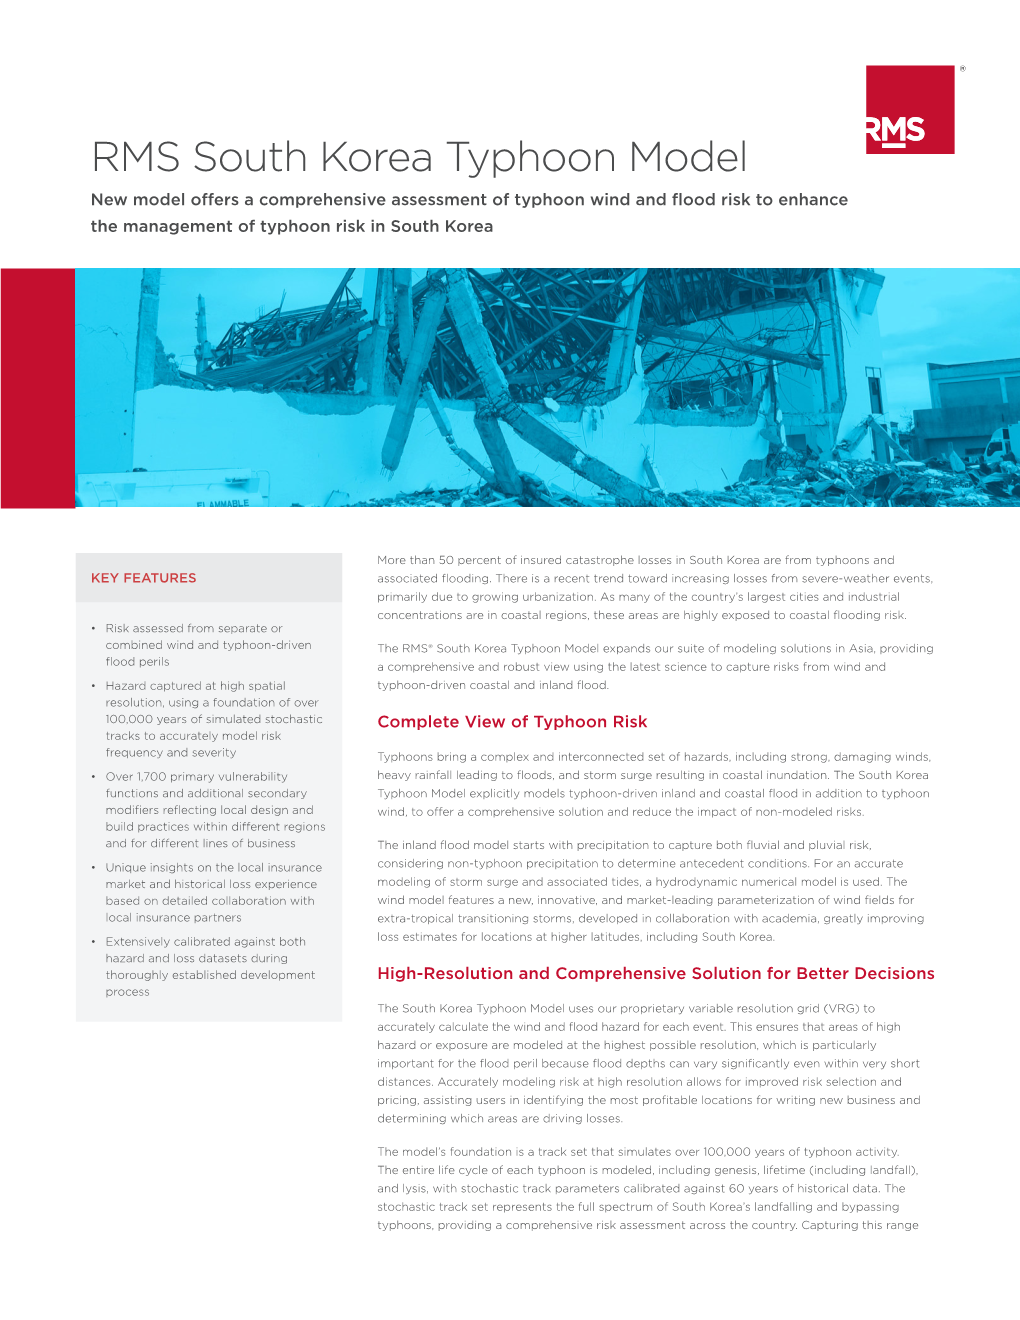 RMS South Korea Typhoon Model New Model Offers a Comprehensive Assessment of Typhoon Wind and Flood Risk to Enhance the Management of Typhoon Risk in South Korea